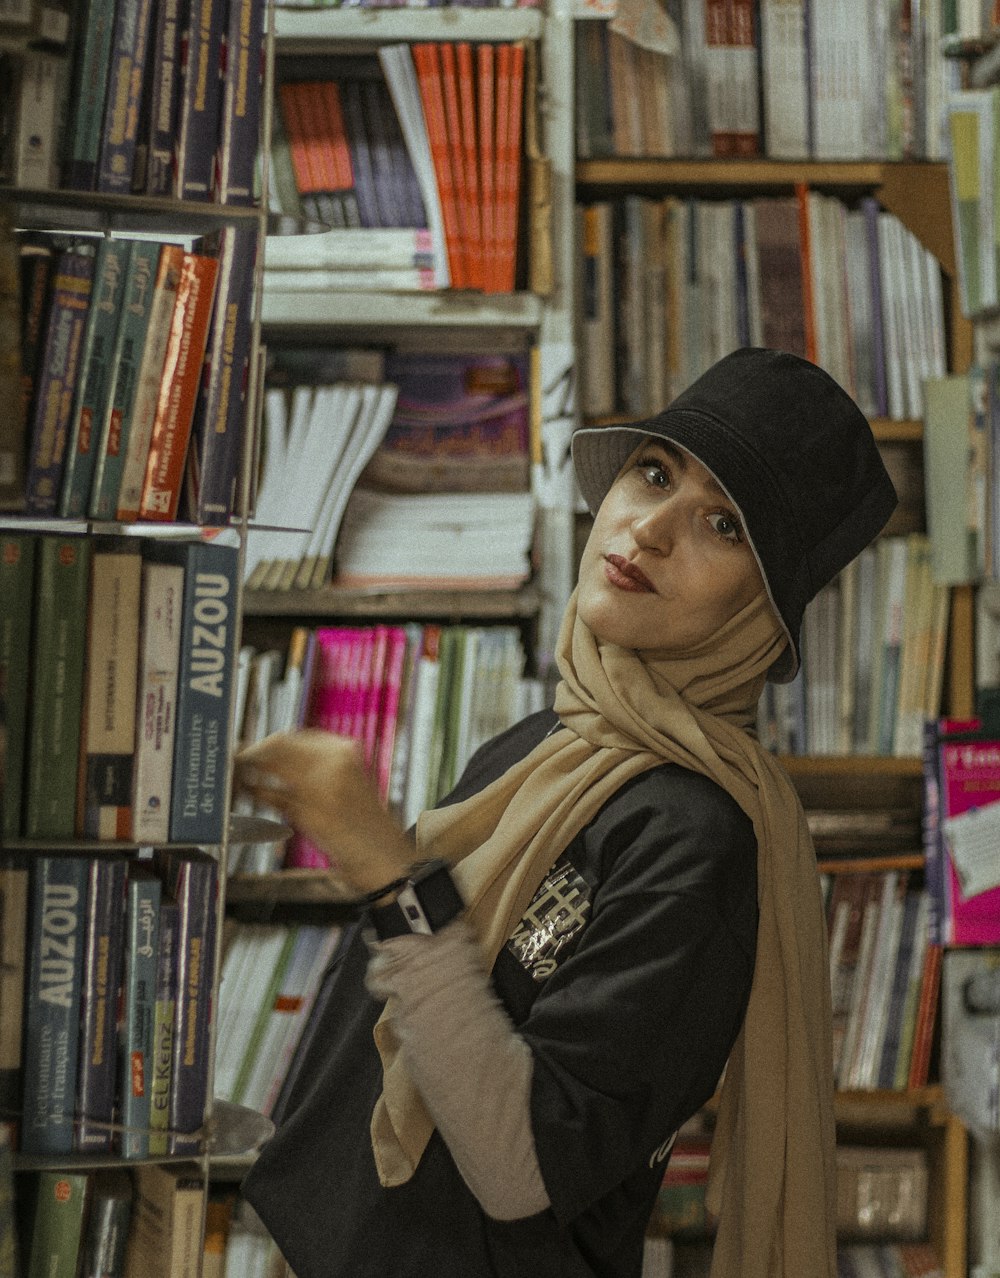 woman in black knit cap and black jacket standing in front of books